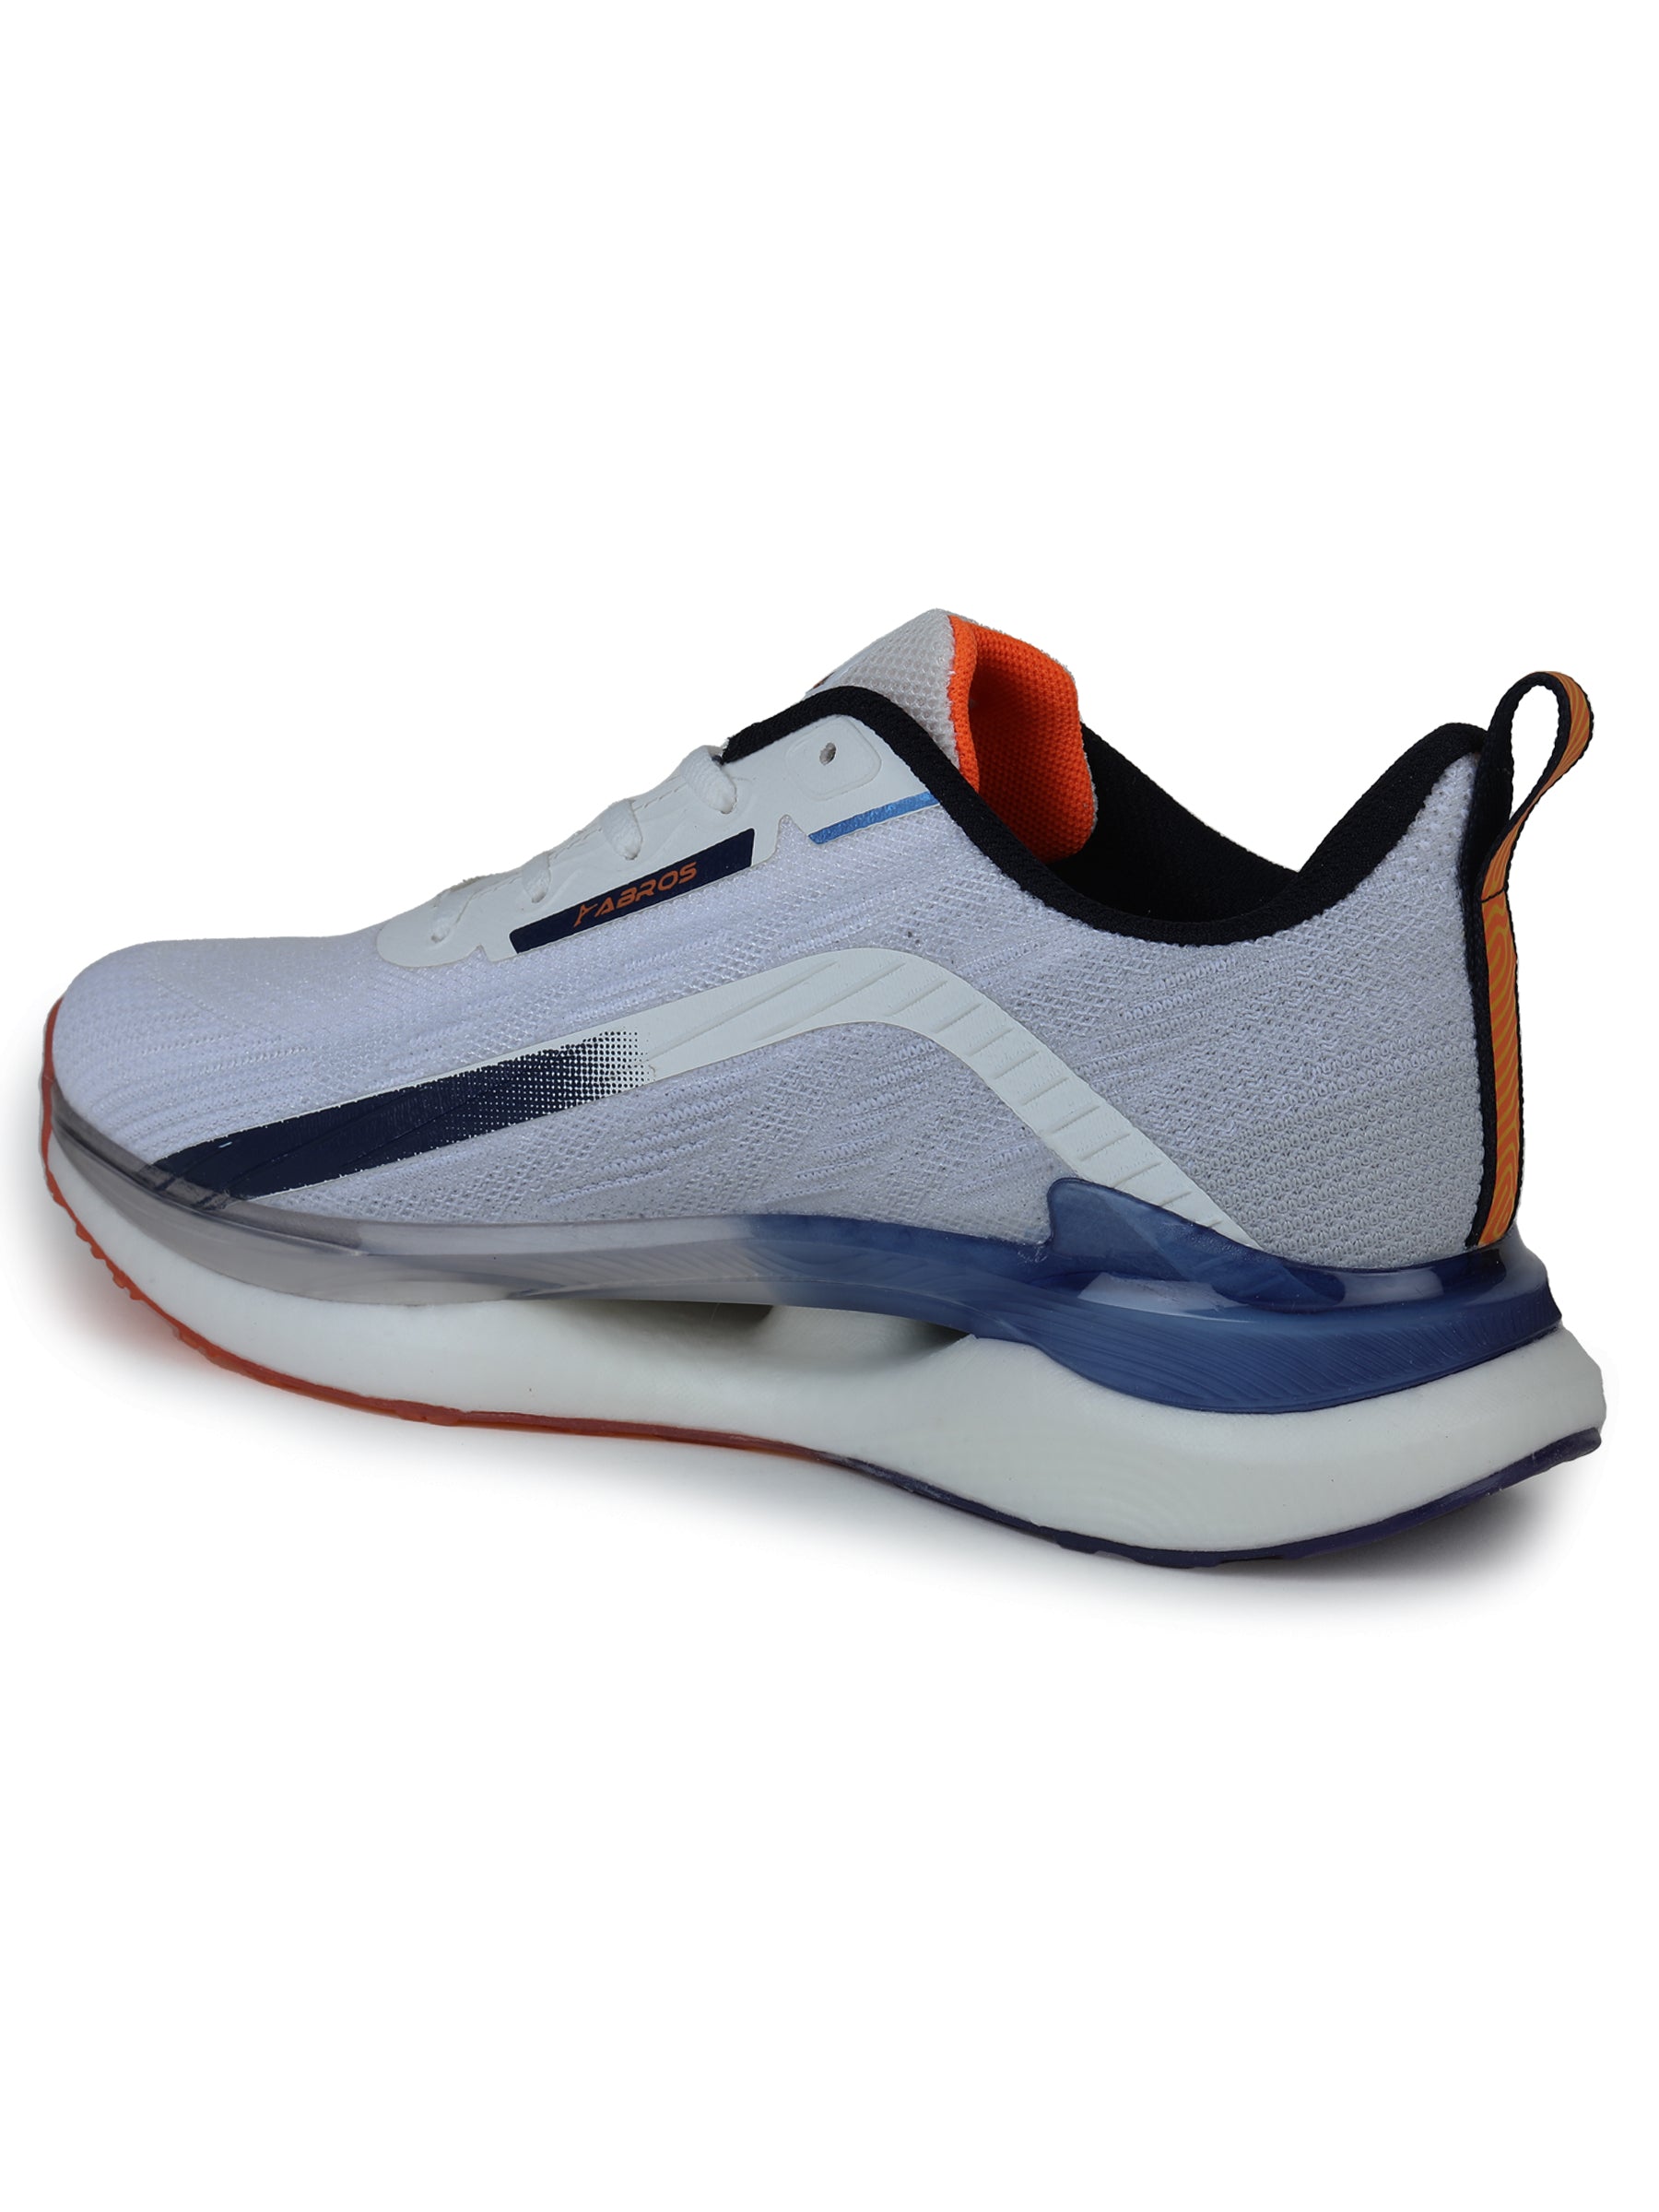 SLEDGE Sports shoes For Men's